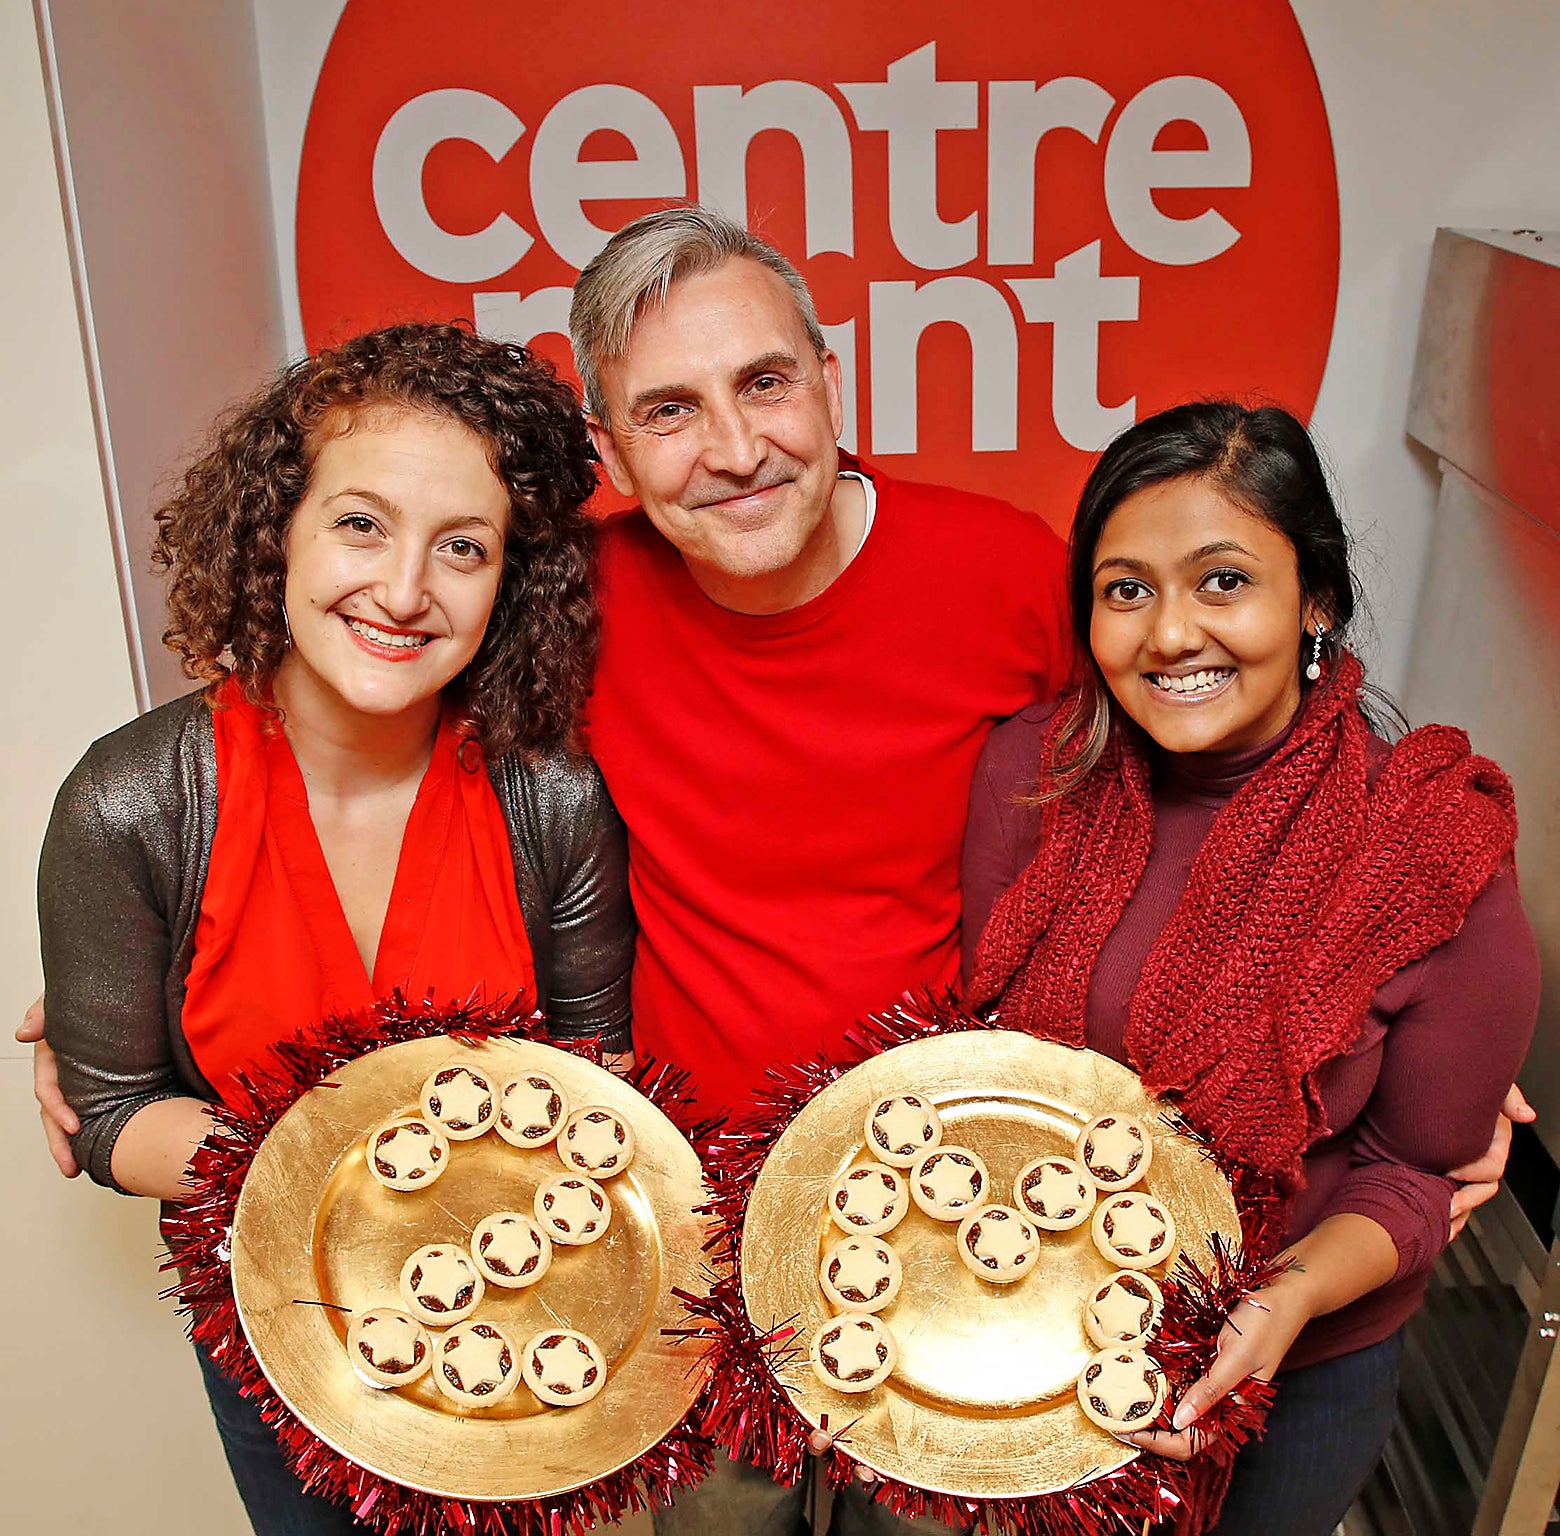 From left to right: Gaia Marcus, Matt Carlisle and Samia Meah Staff from the Centrepoint Parliament celebrate the campaign’s latest milestone